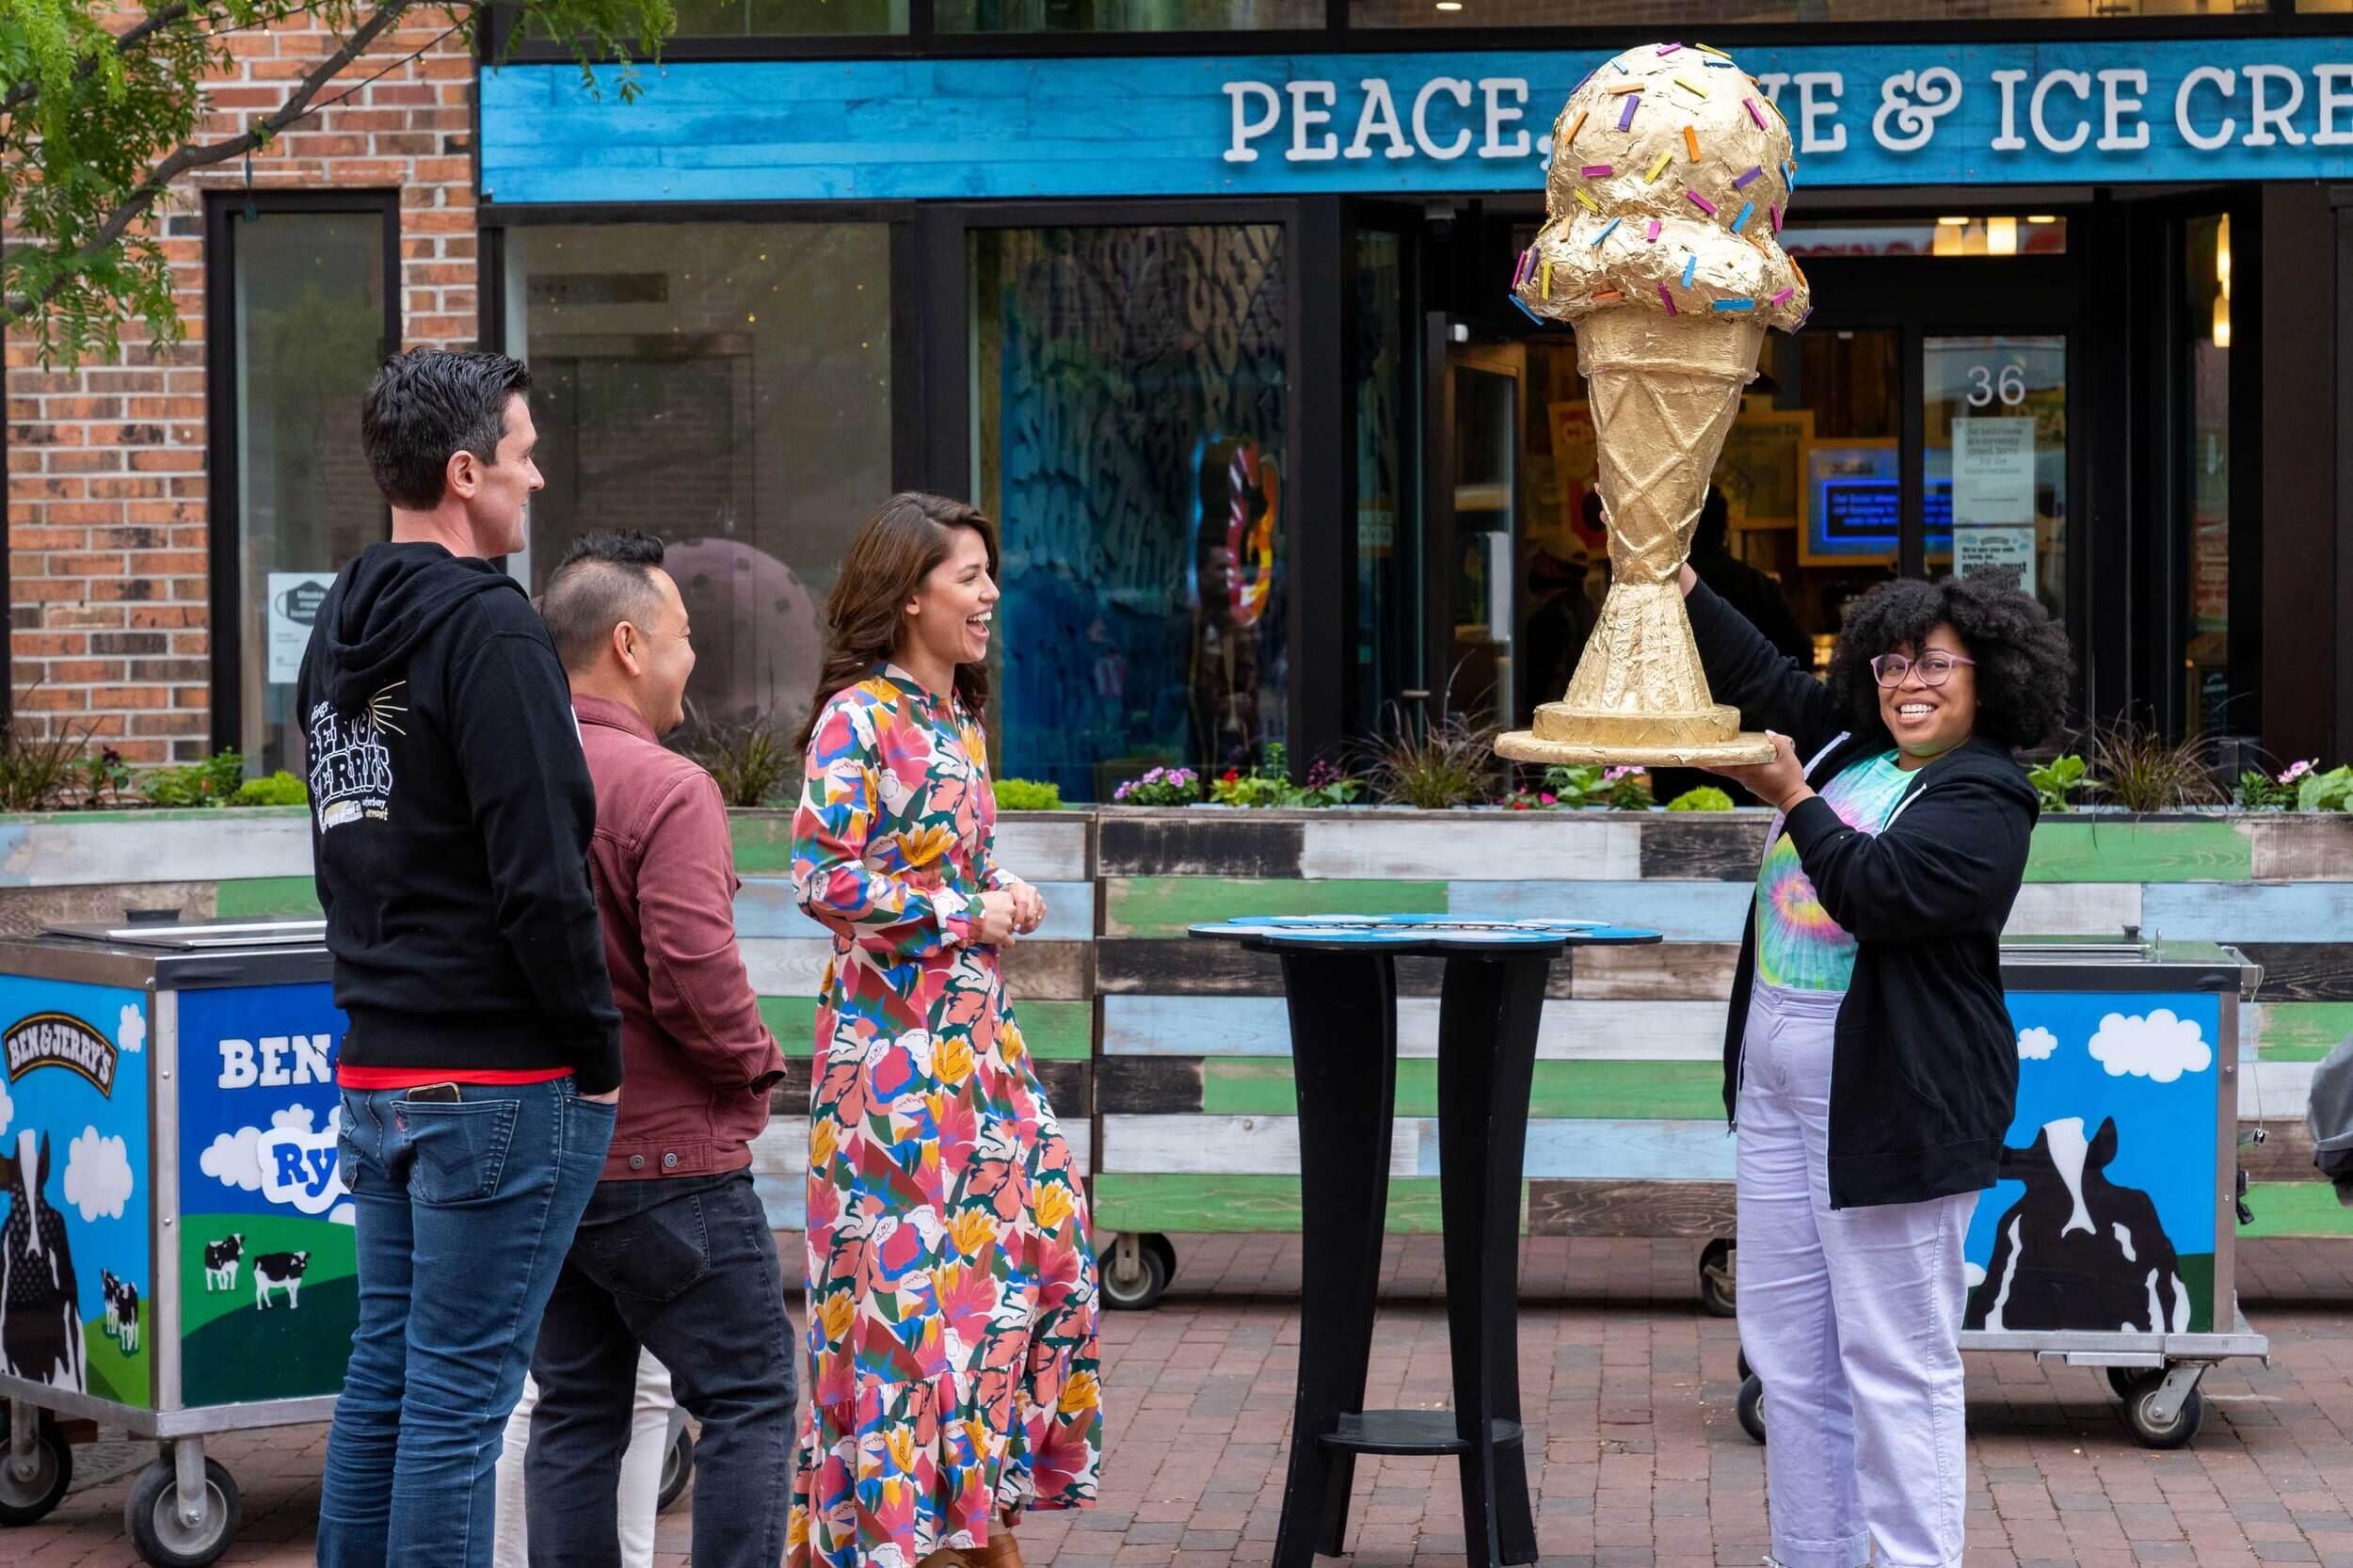 A woman holds aloft a large ice cream cone trophy. Two men and a woman stand to the side, watching her with smiles.